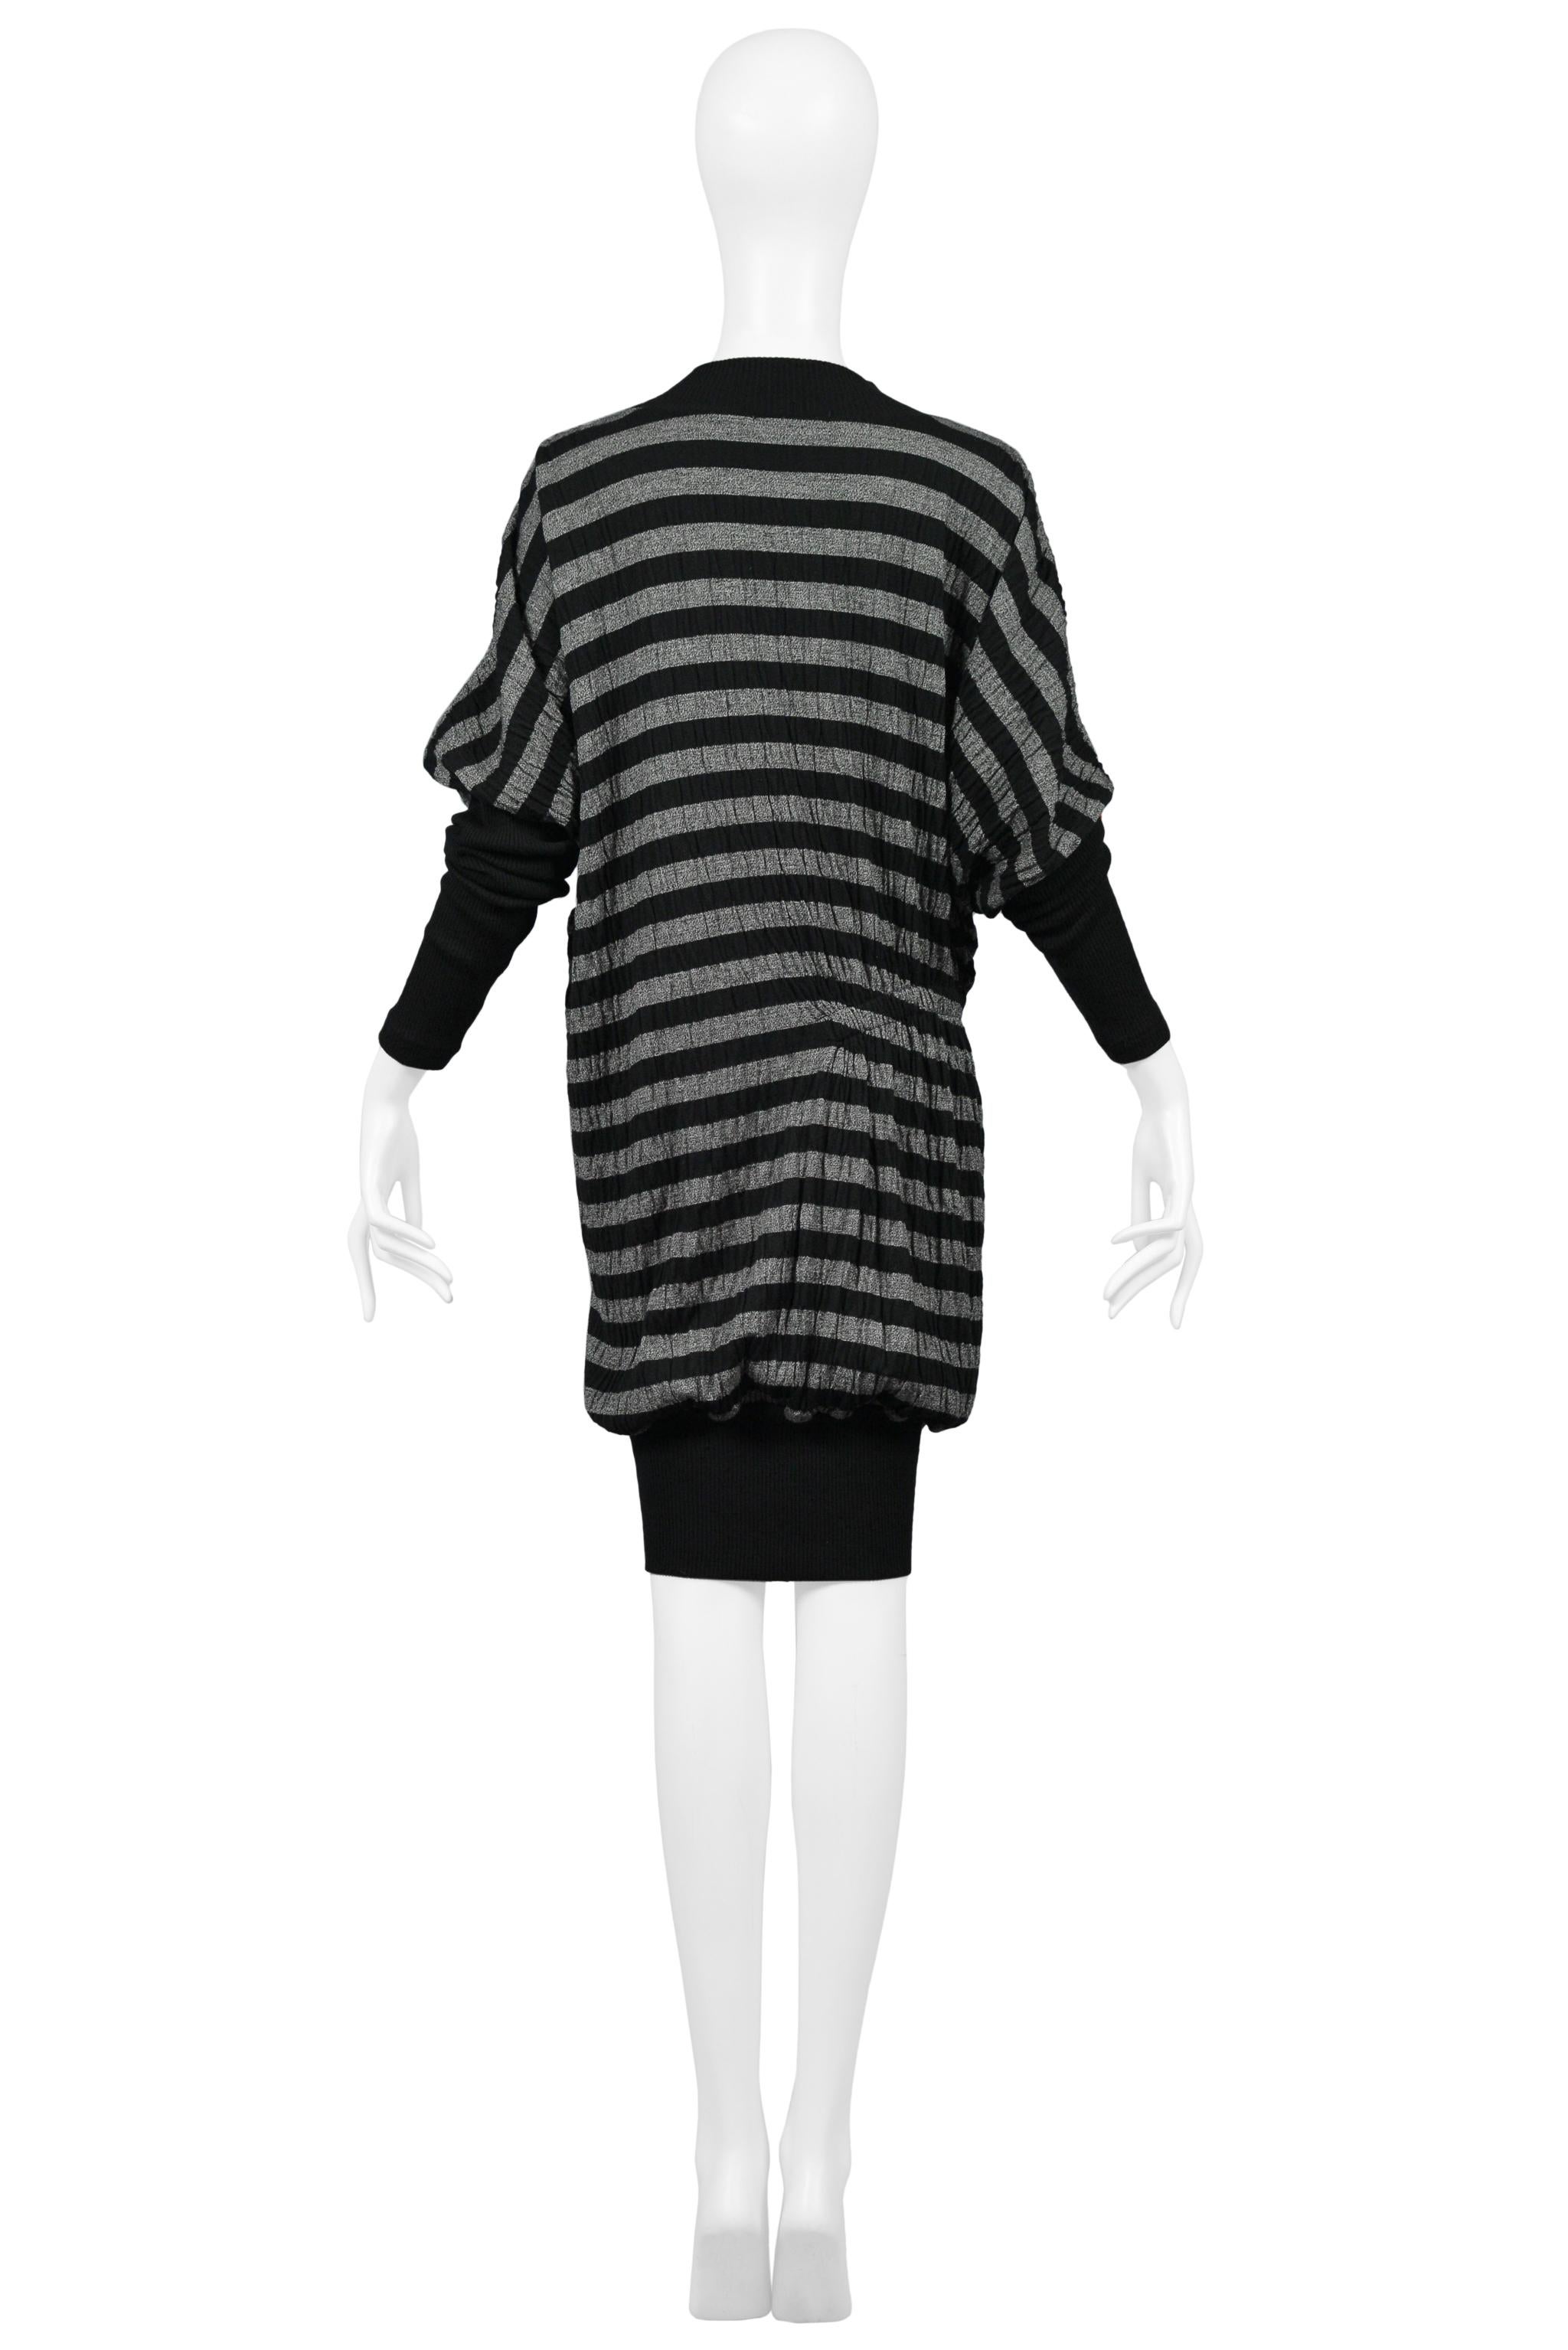 Resurrection Vintage is excited to offer a vintage Issey Miyake black and grey striped dress with asymmetrical smocking, long sleeves with contrasting cuffs, and a knee-length body with contrasting hem. 

Issey Miyake
Size M
Knit
Excellent Vintage